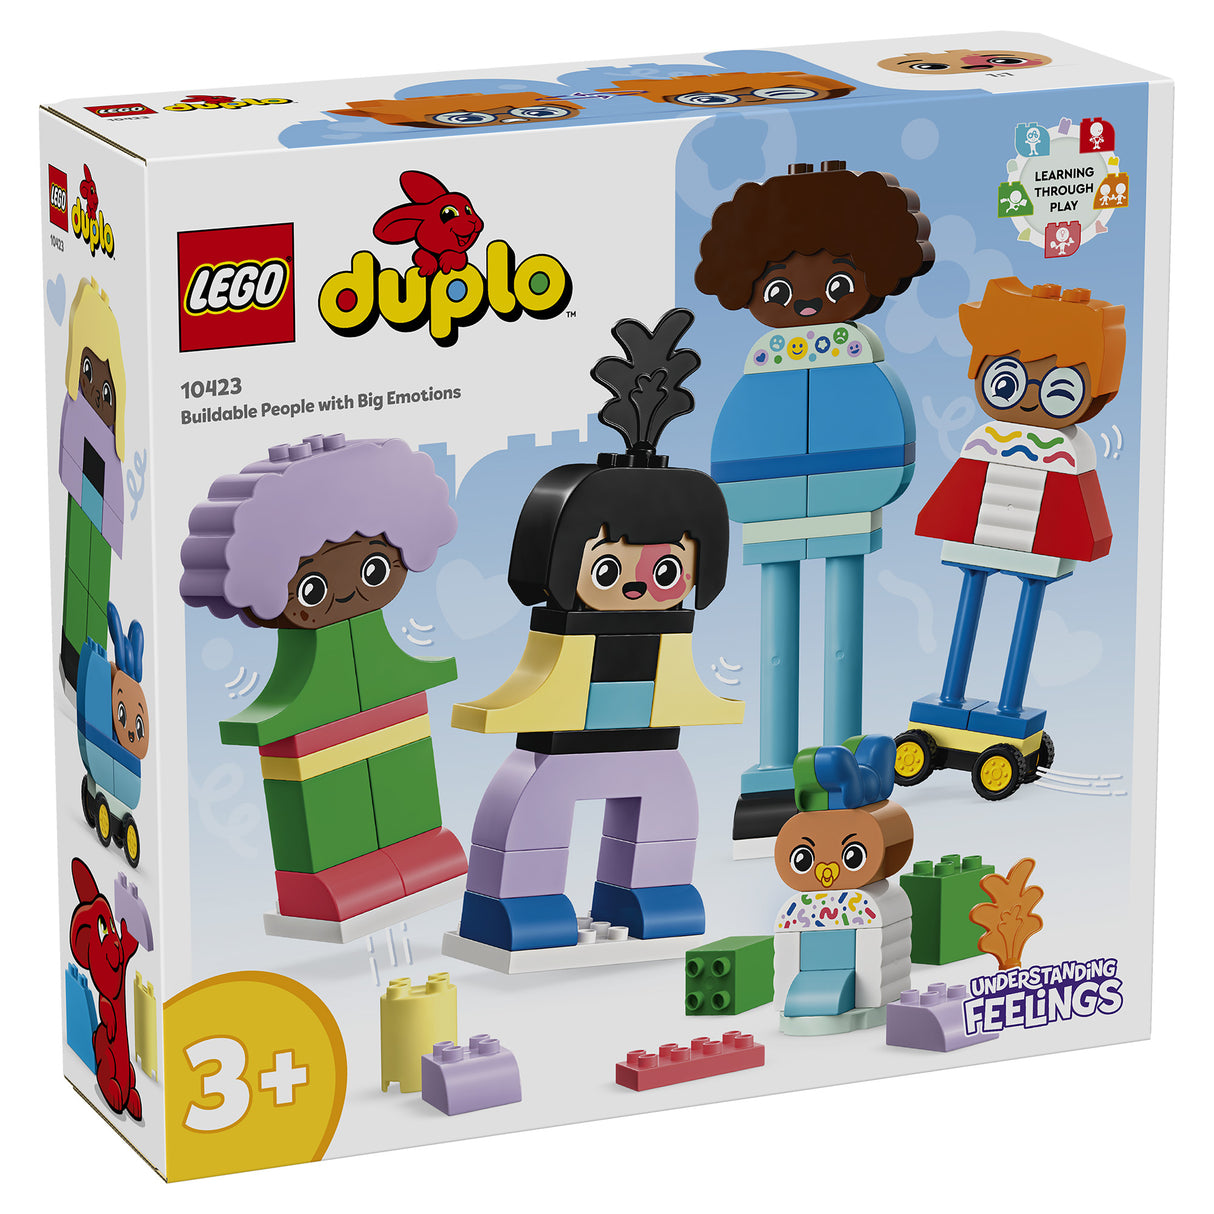 LEGO Duplo Buildable People with Big Emotions 10423, (71-pieces)